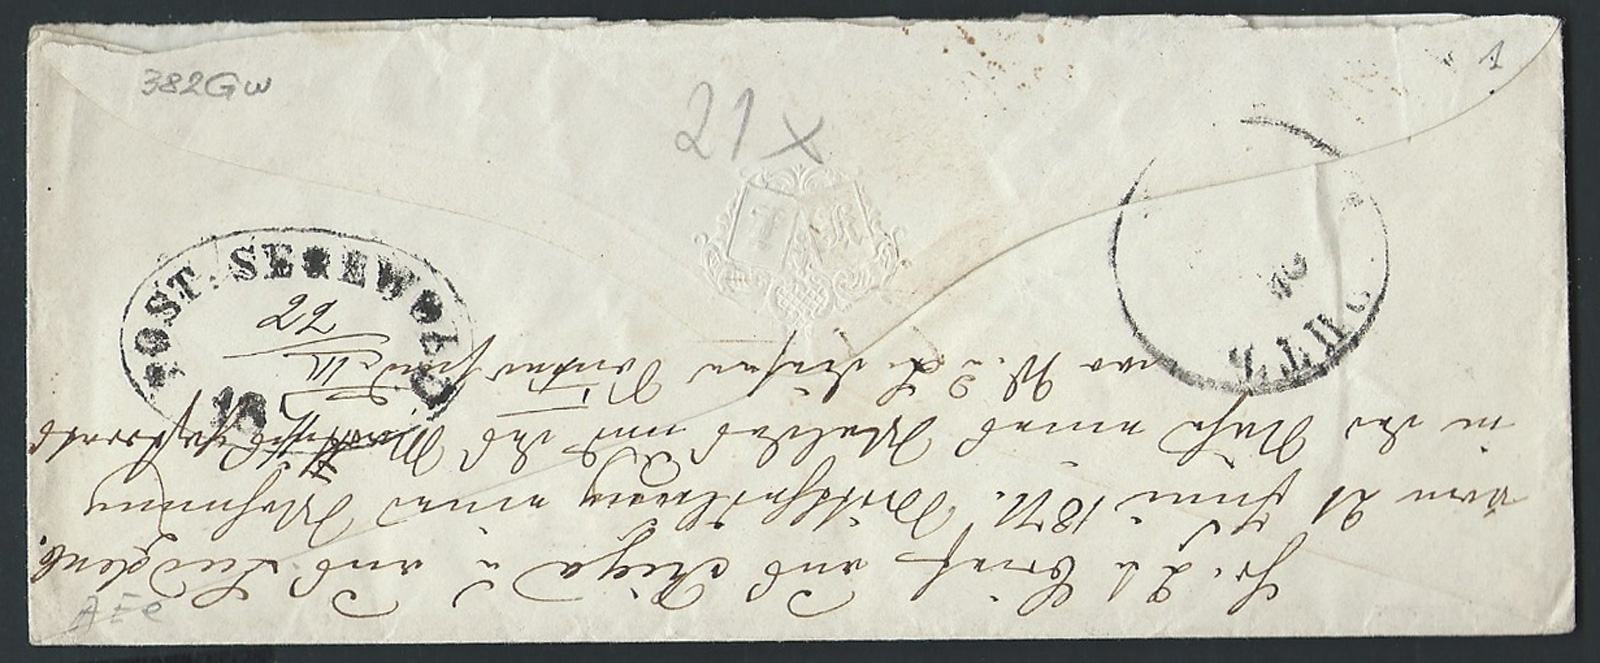 Russia  Undated envelope to Dorpat, Estonia franked 1866-75 10k. tied by oval POST SEGEWOLD date stamp with a further, superb strike on reverse showing date added in manuscript, with arrival to right. Mikulski handstamp.